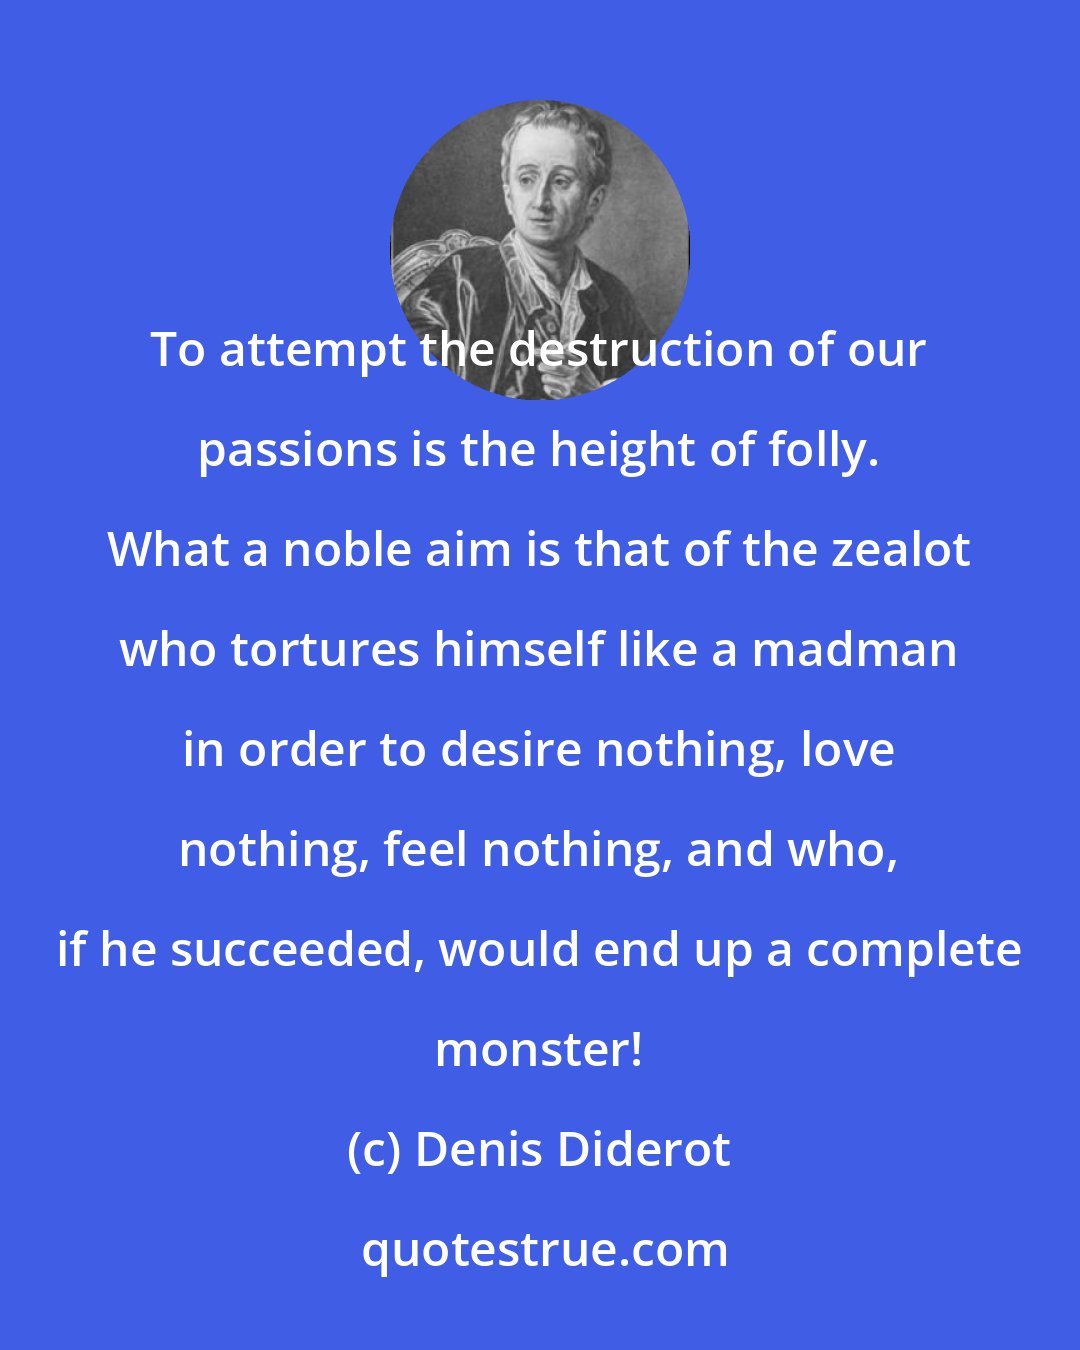 Denis Diderot: To attempt the destruction of our passions is the height of folly. What a noble aim is that of the zealot who tortures himself like a madman in order to desire nothing, love nothing, feel nothing, and who, if he succeeded, would end up a complete monster!